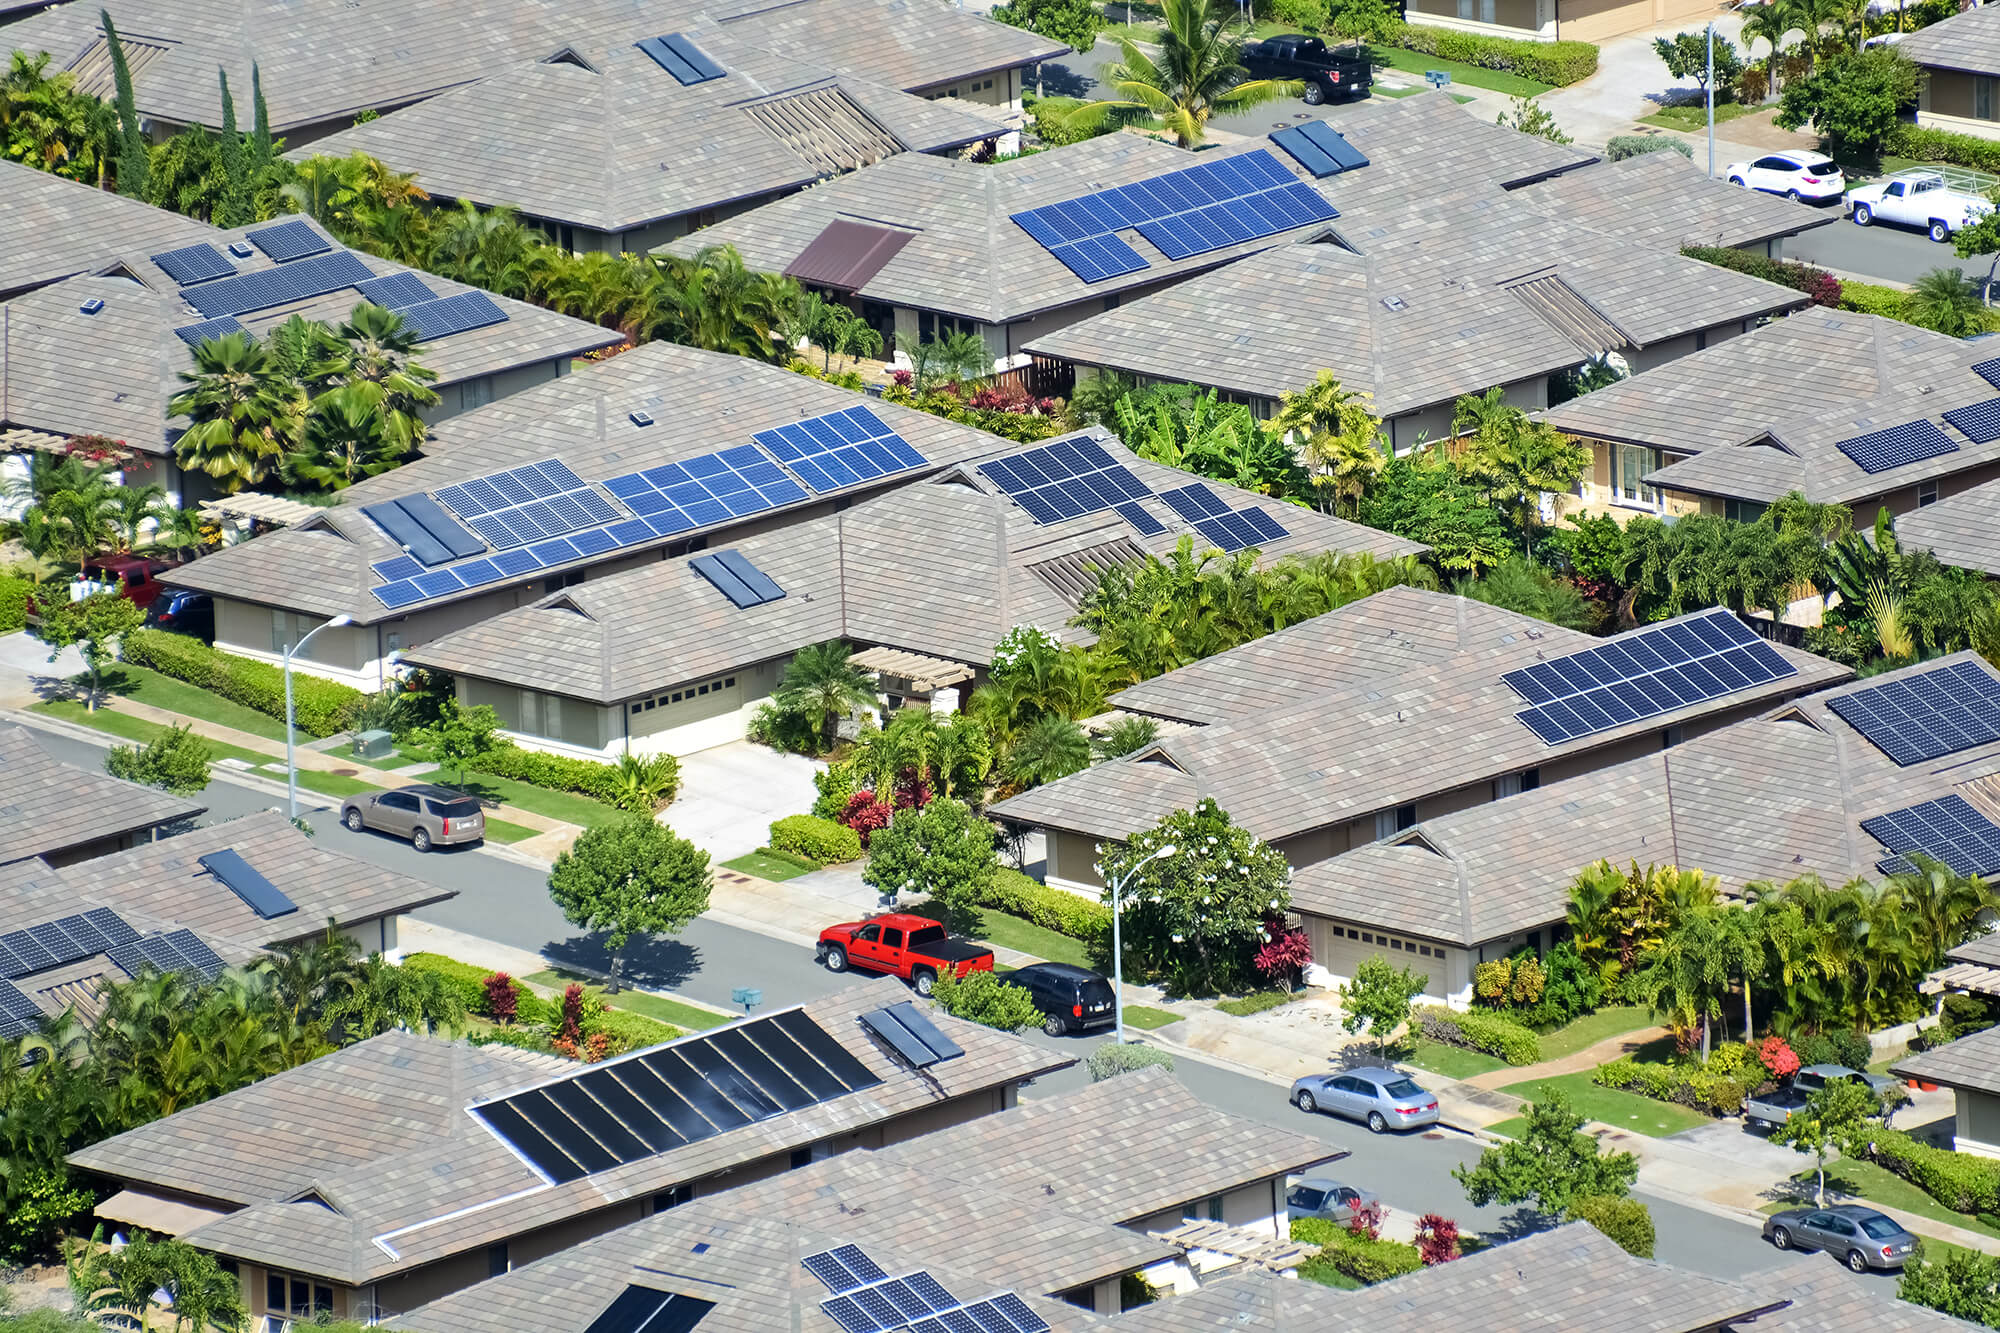 Suburban aerial shot of homes with solar panels